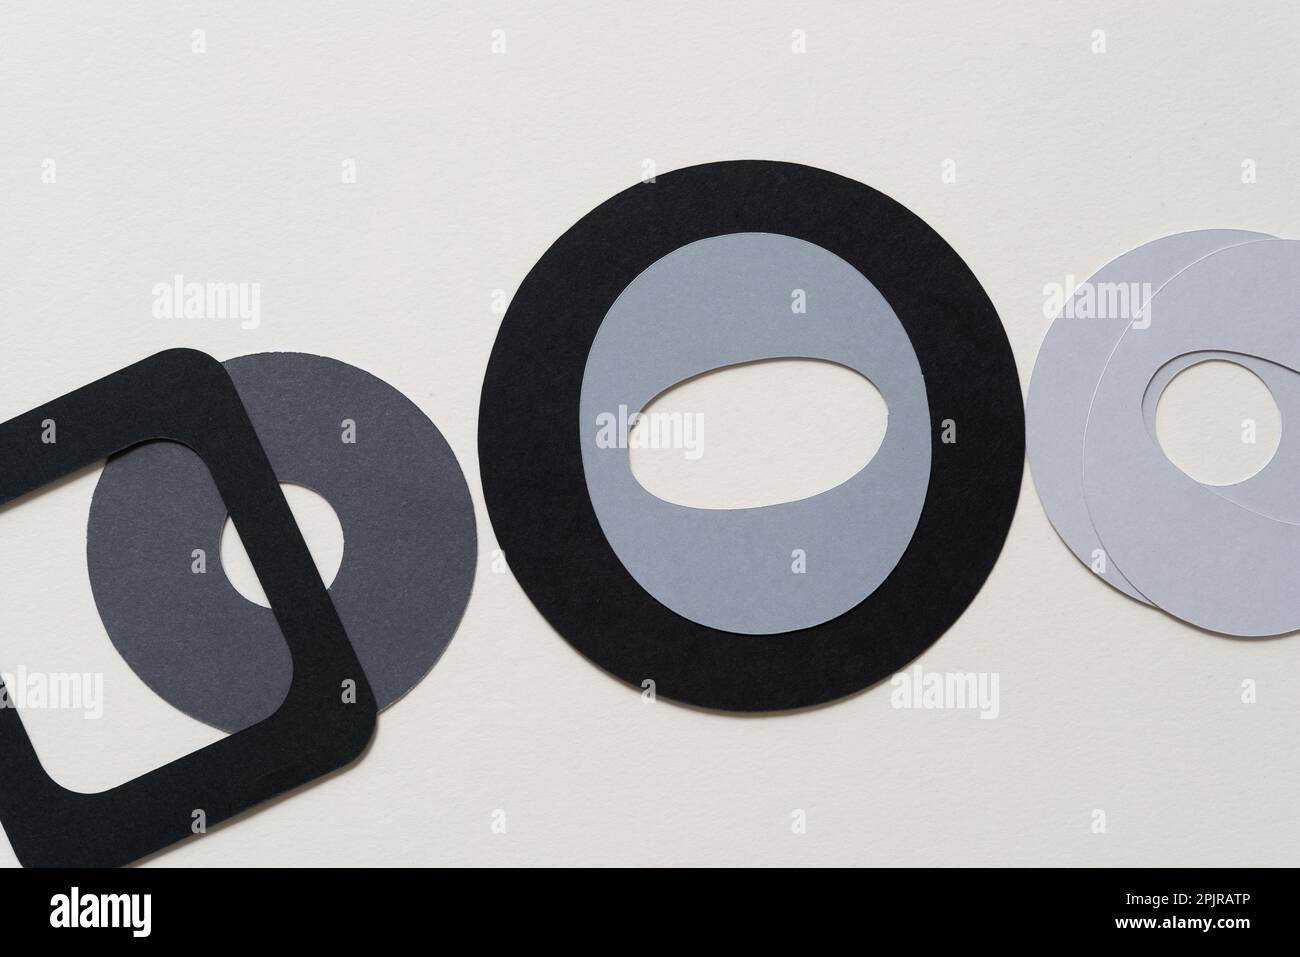 mostly a collection of paper rings in black and grey and square frame with rounded corners on blank paper Stock Photo